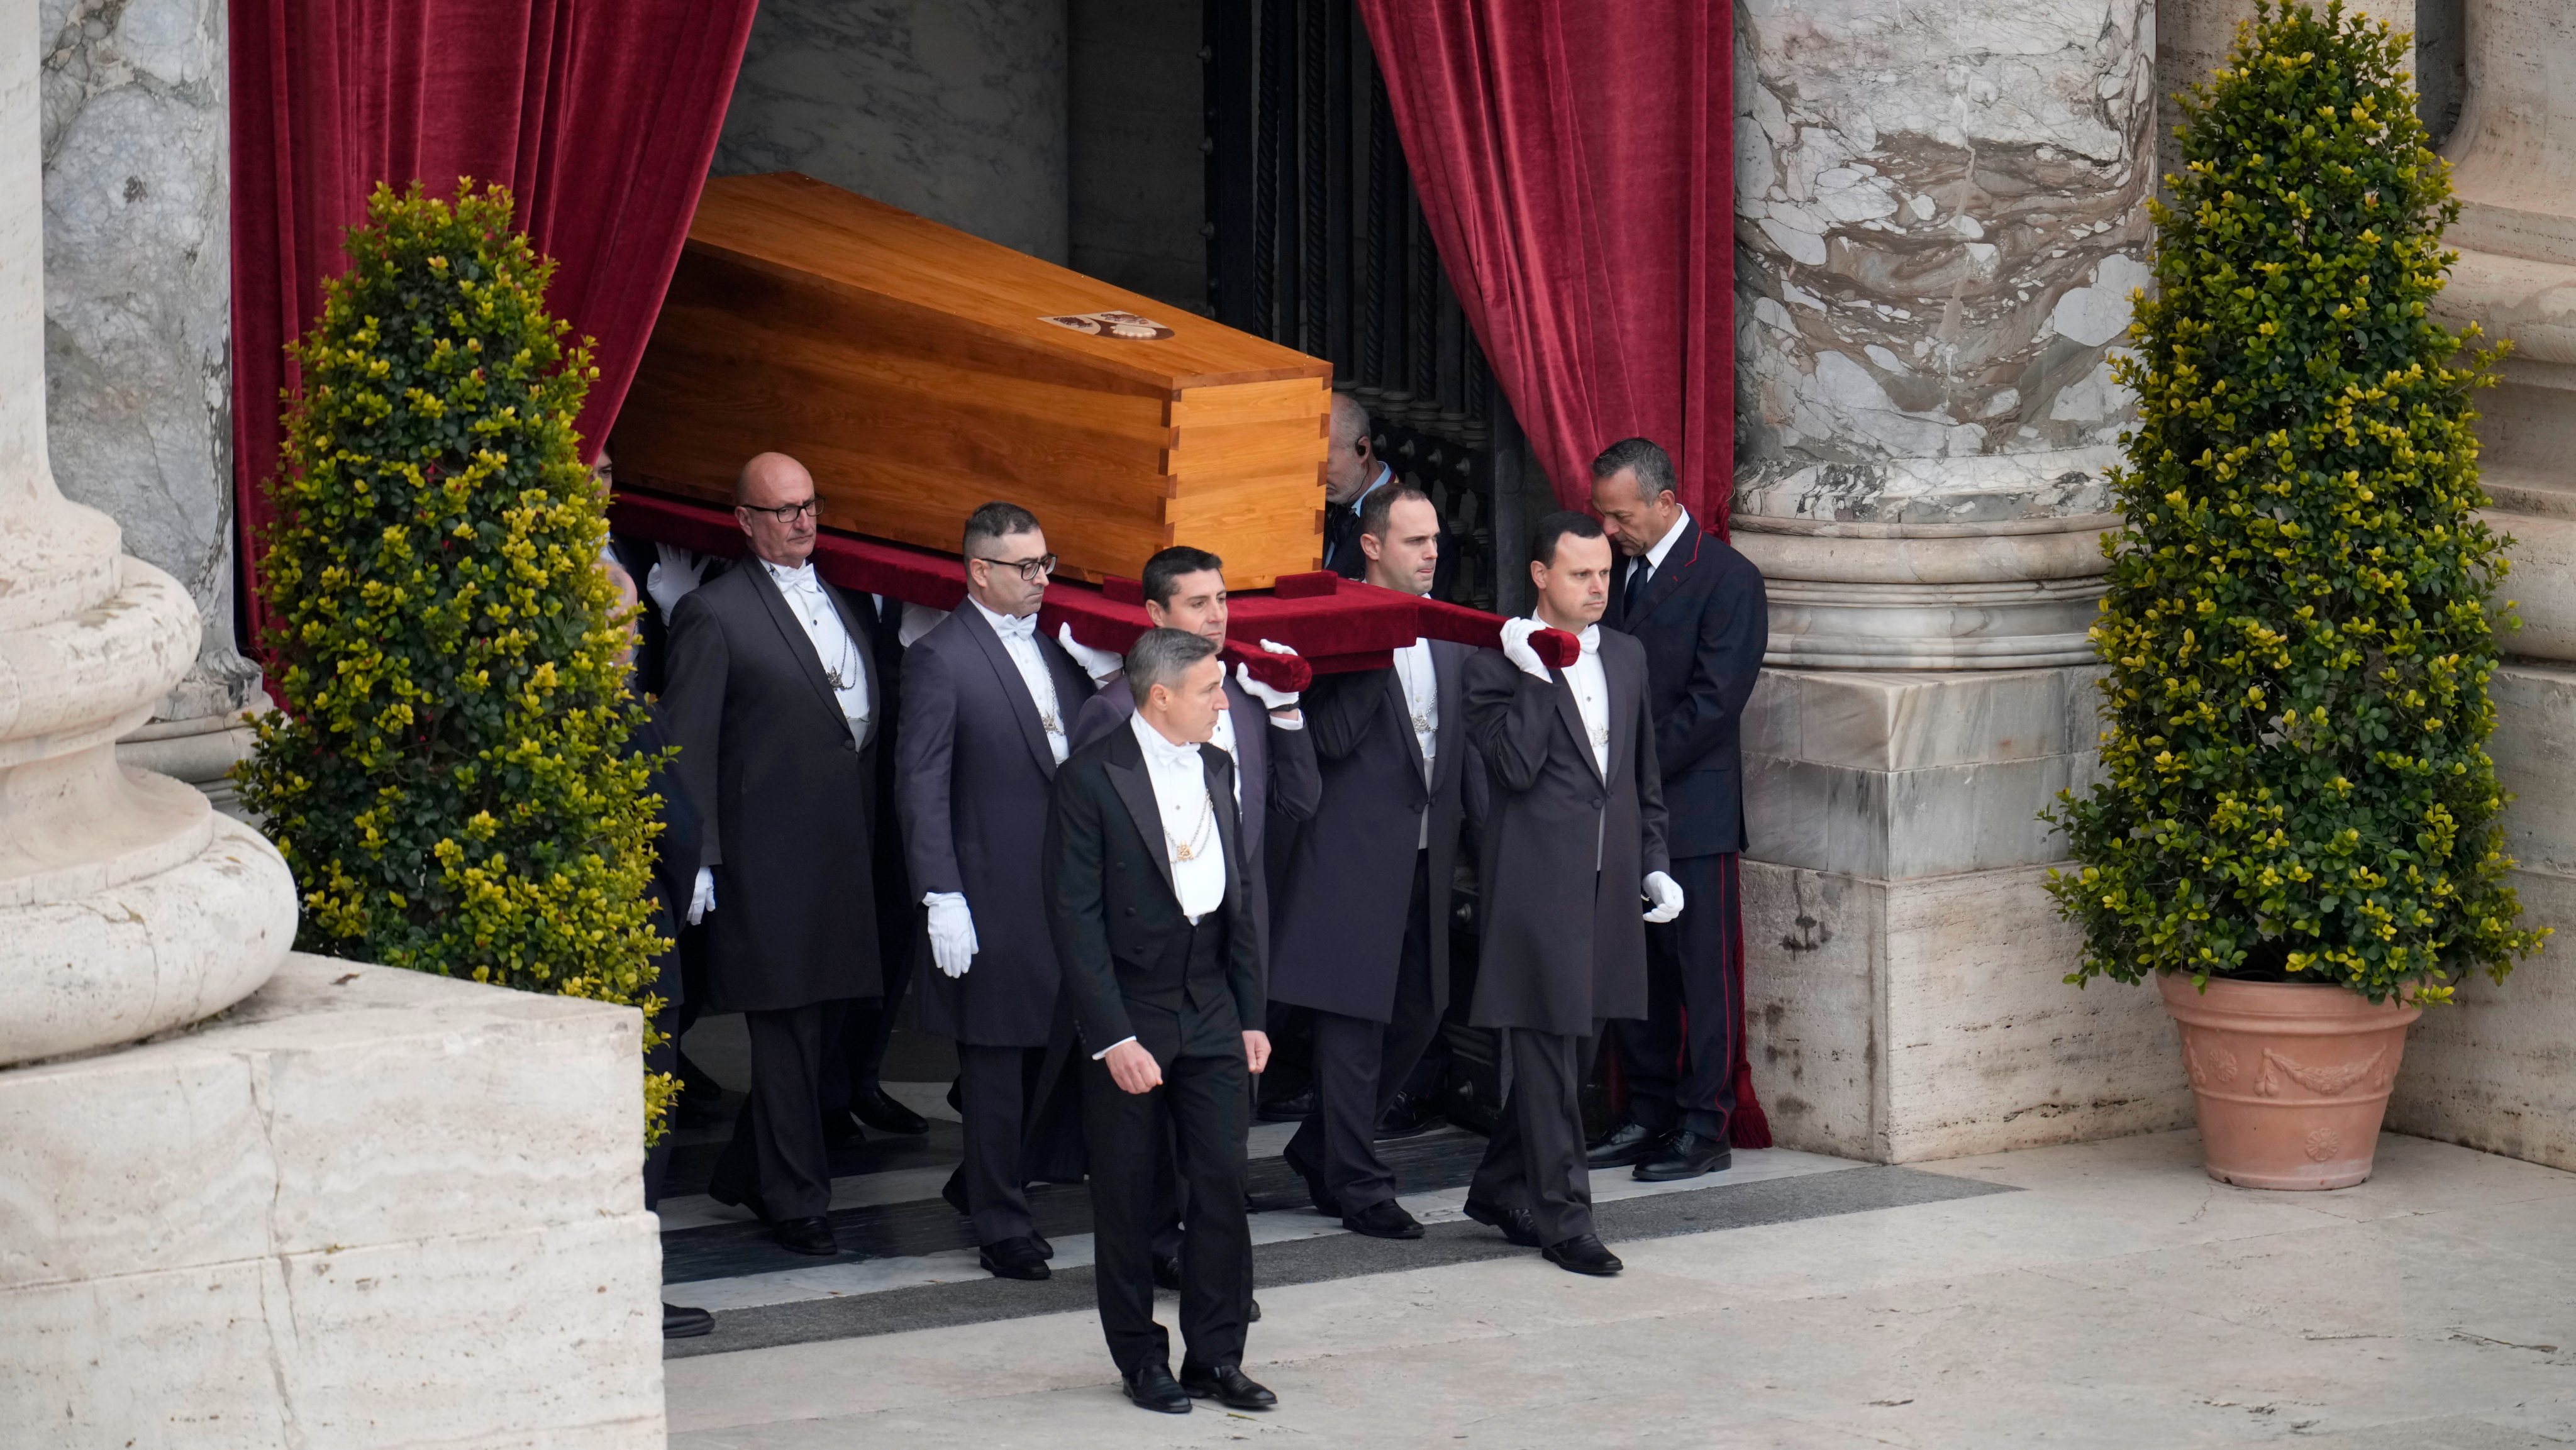 Mourners Gather In Vatican City On The Funeral Day Of Pope Emeritus Benedict XVI